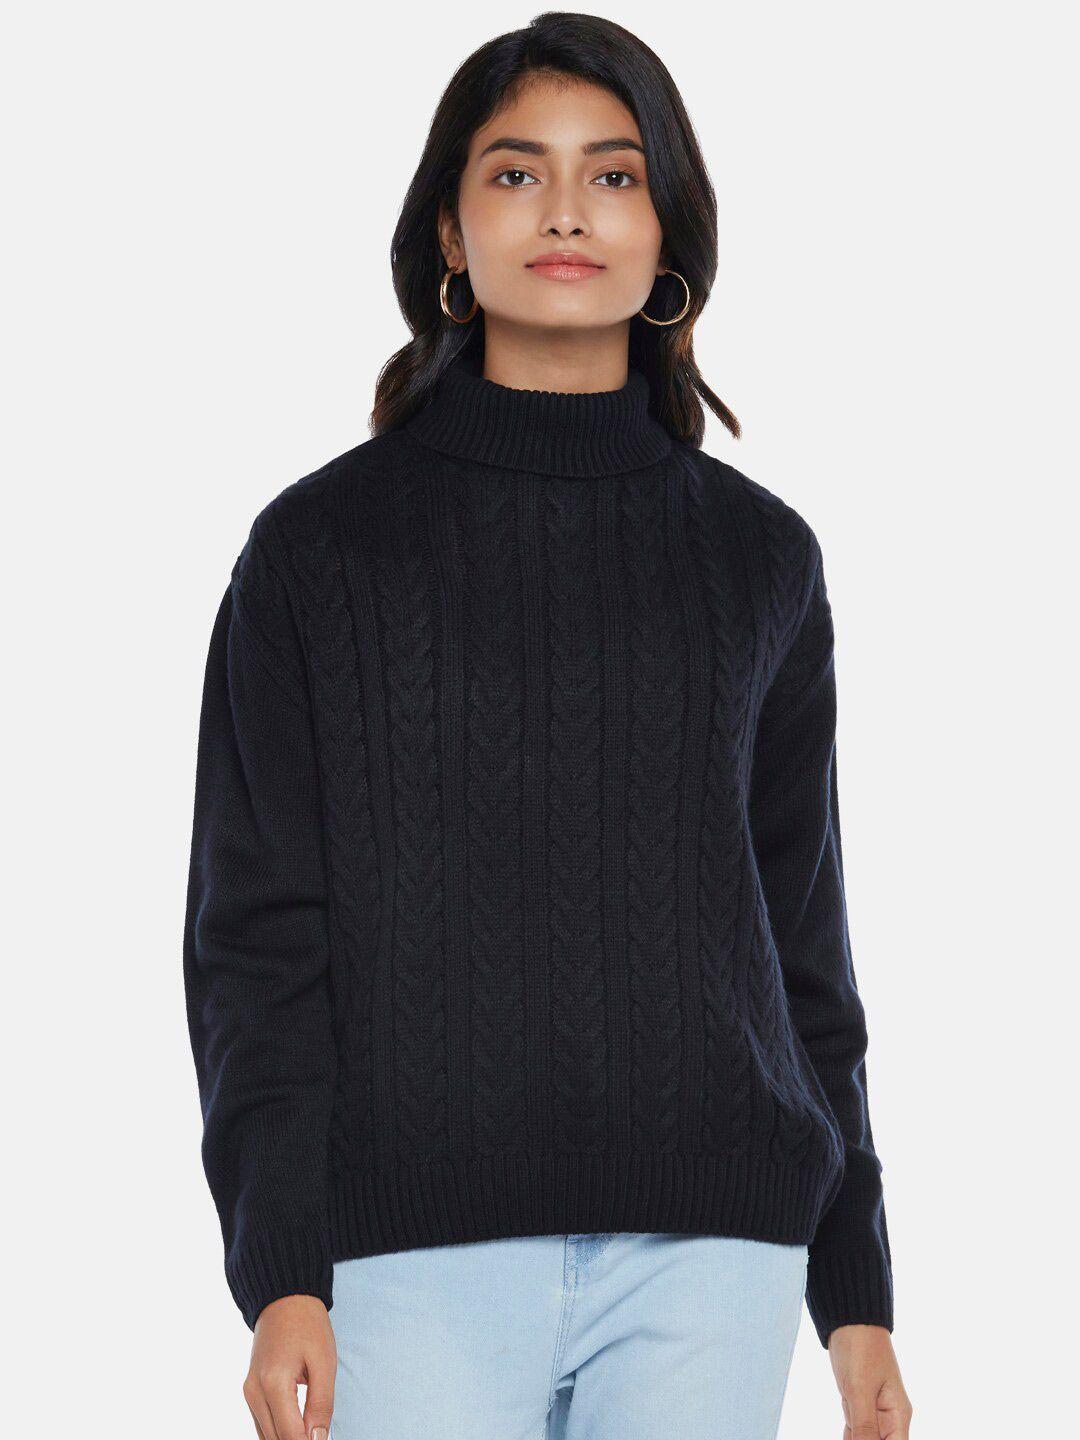 honey by pantaloons women navy blue cable knit pullover sweater